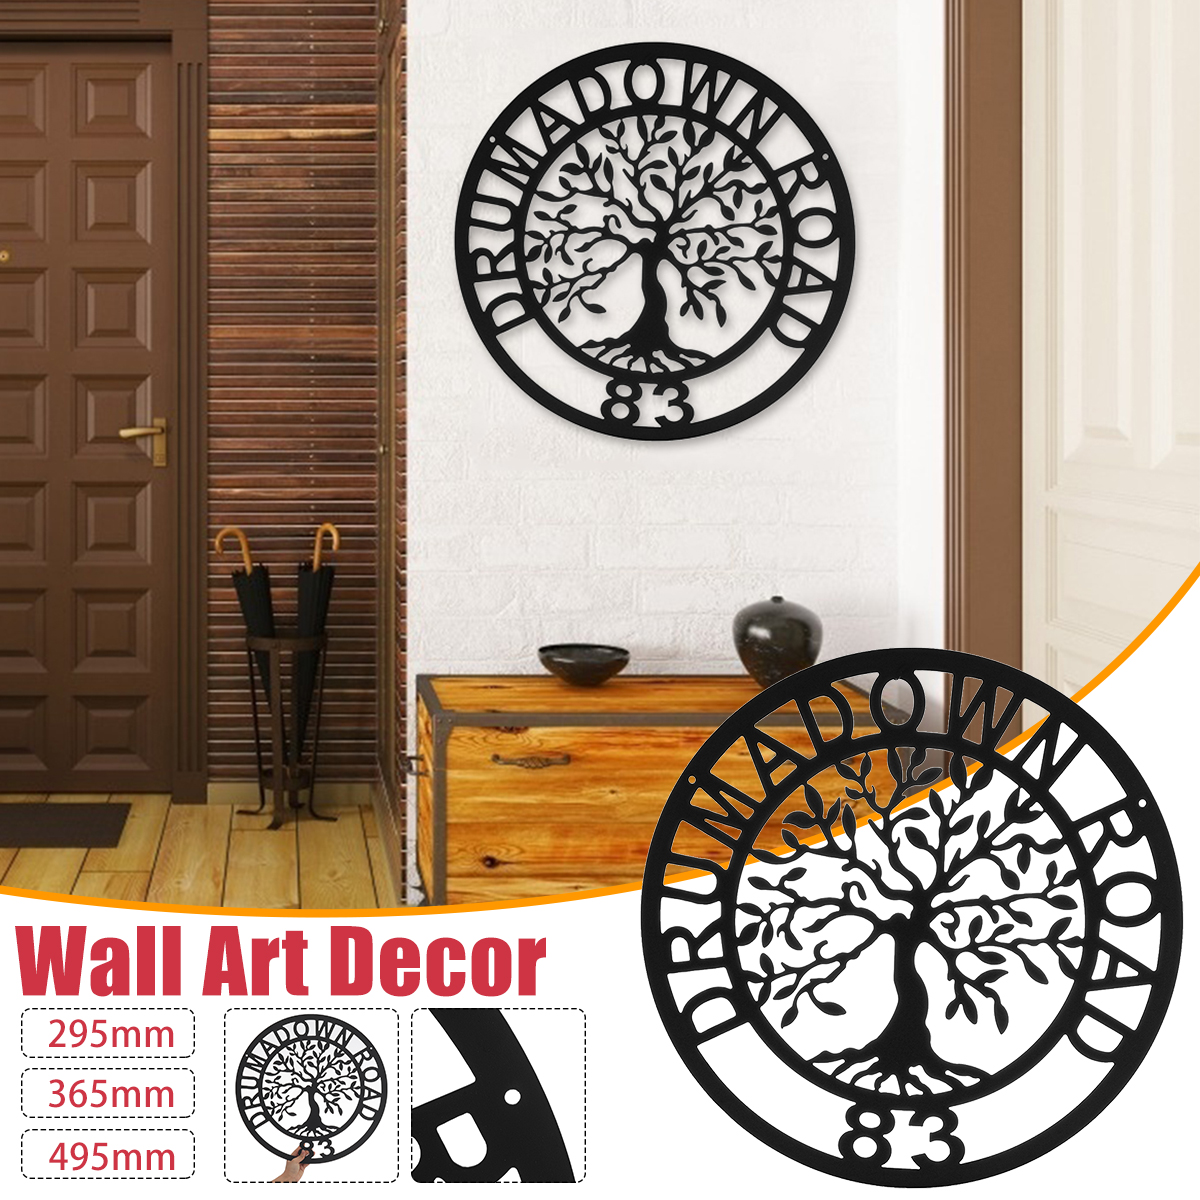 Metal-Round-Tree-of-Life-Wall-Art-Peronsalised-Wall-Decorations-for-Home-Office-Living-Room-Fashion--1764917-1